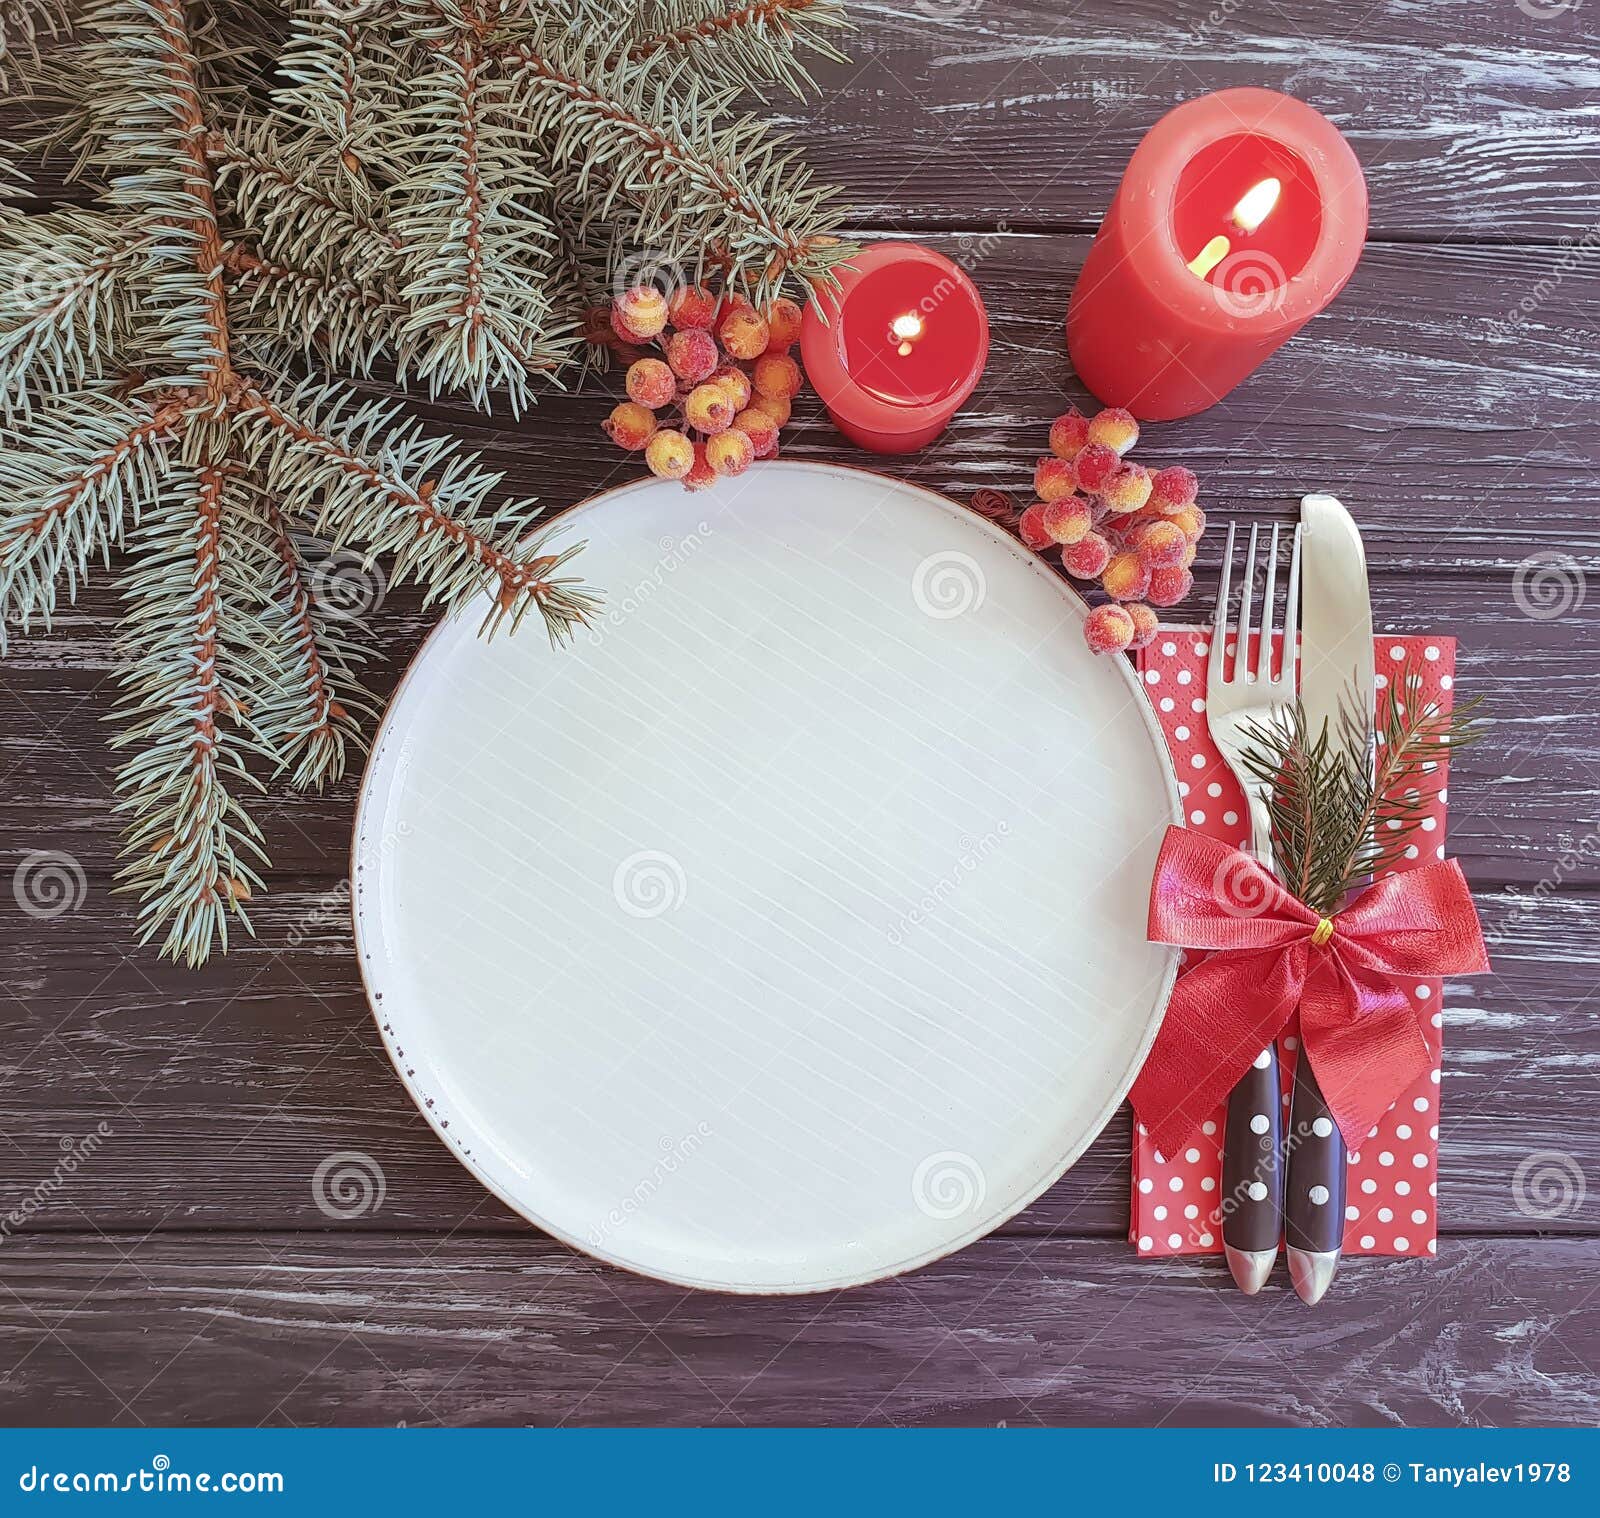 Plate, Fork, Knife, Candle, Invitation Branch Menu of a Christmas Tree ...